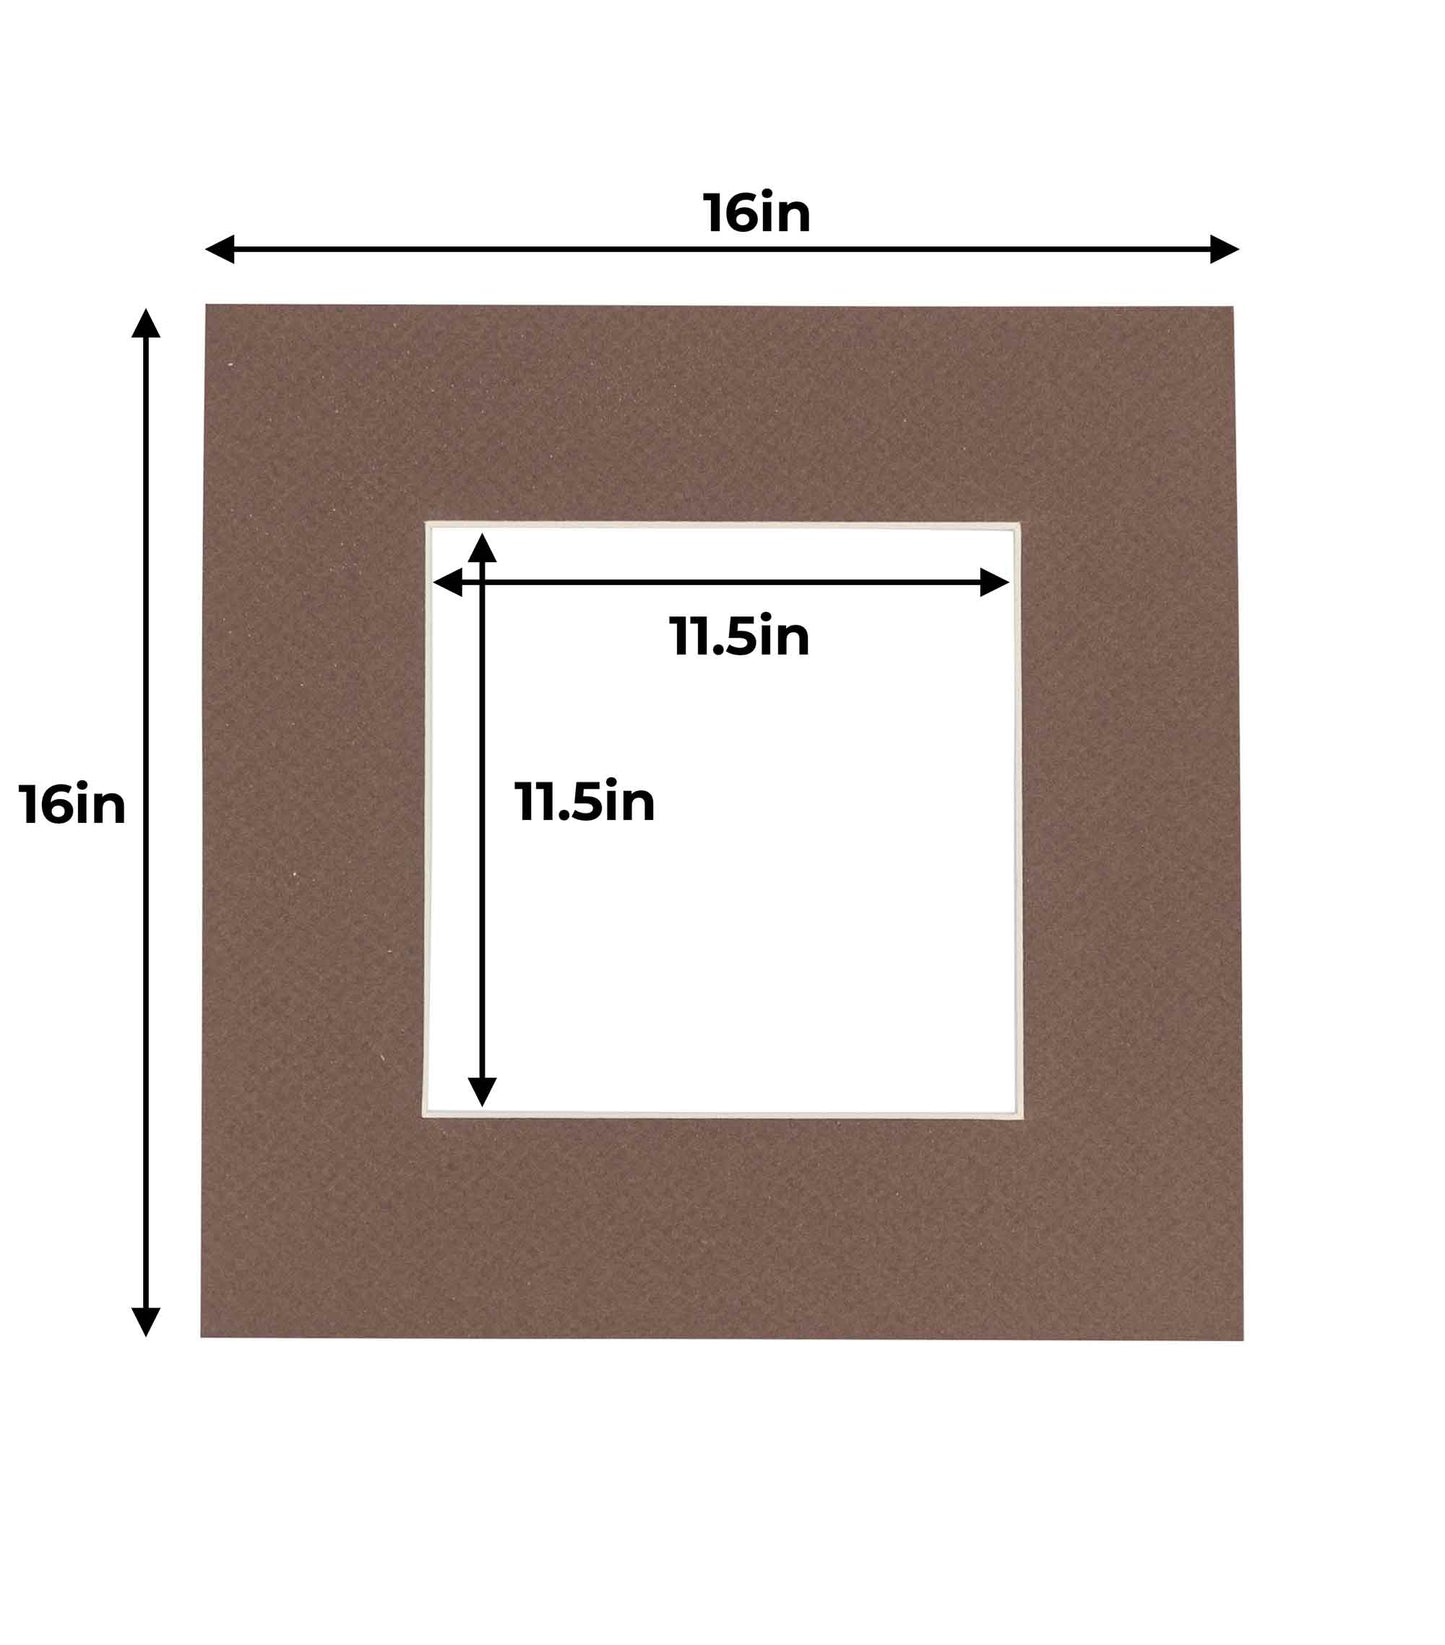 Pack of 10 Chocolate Brown Precut Acid-Free Matboard Set with Clear Bags & Backings